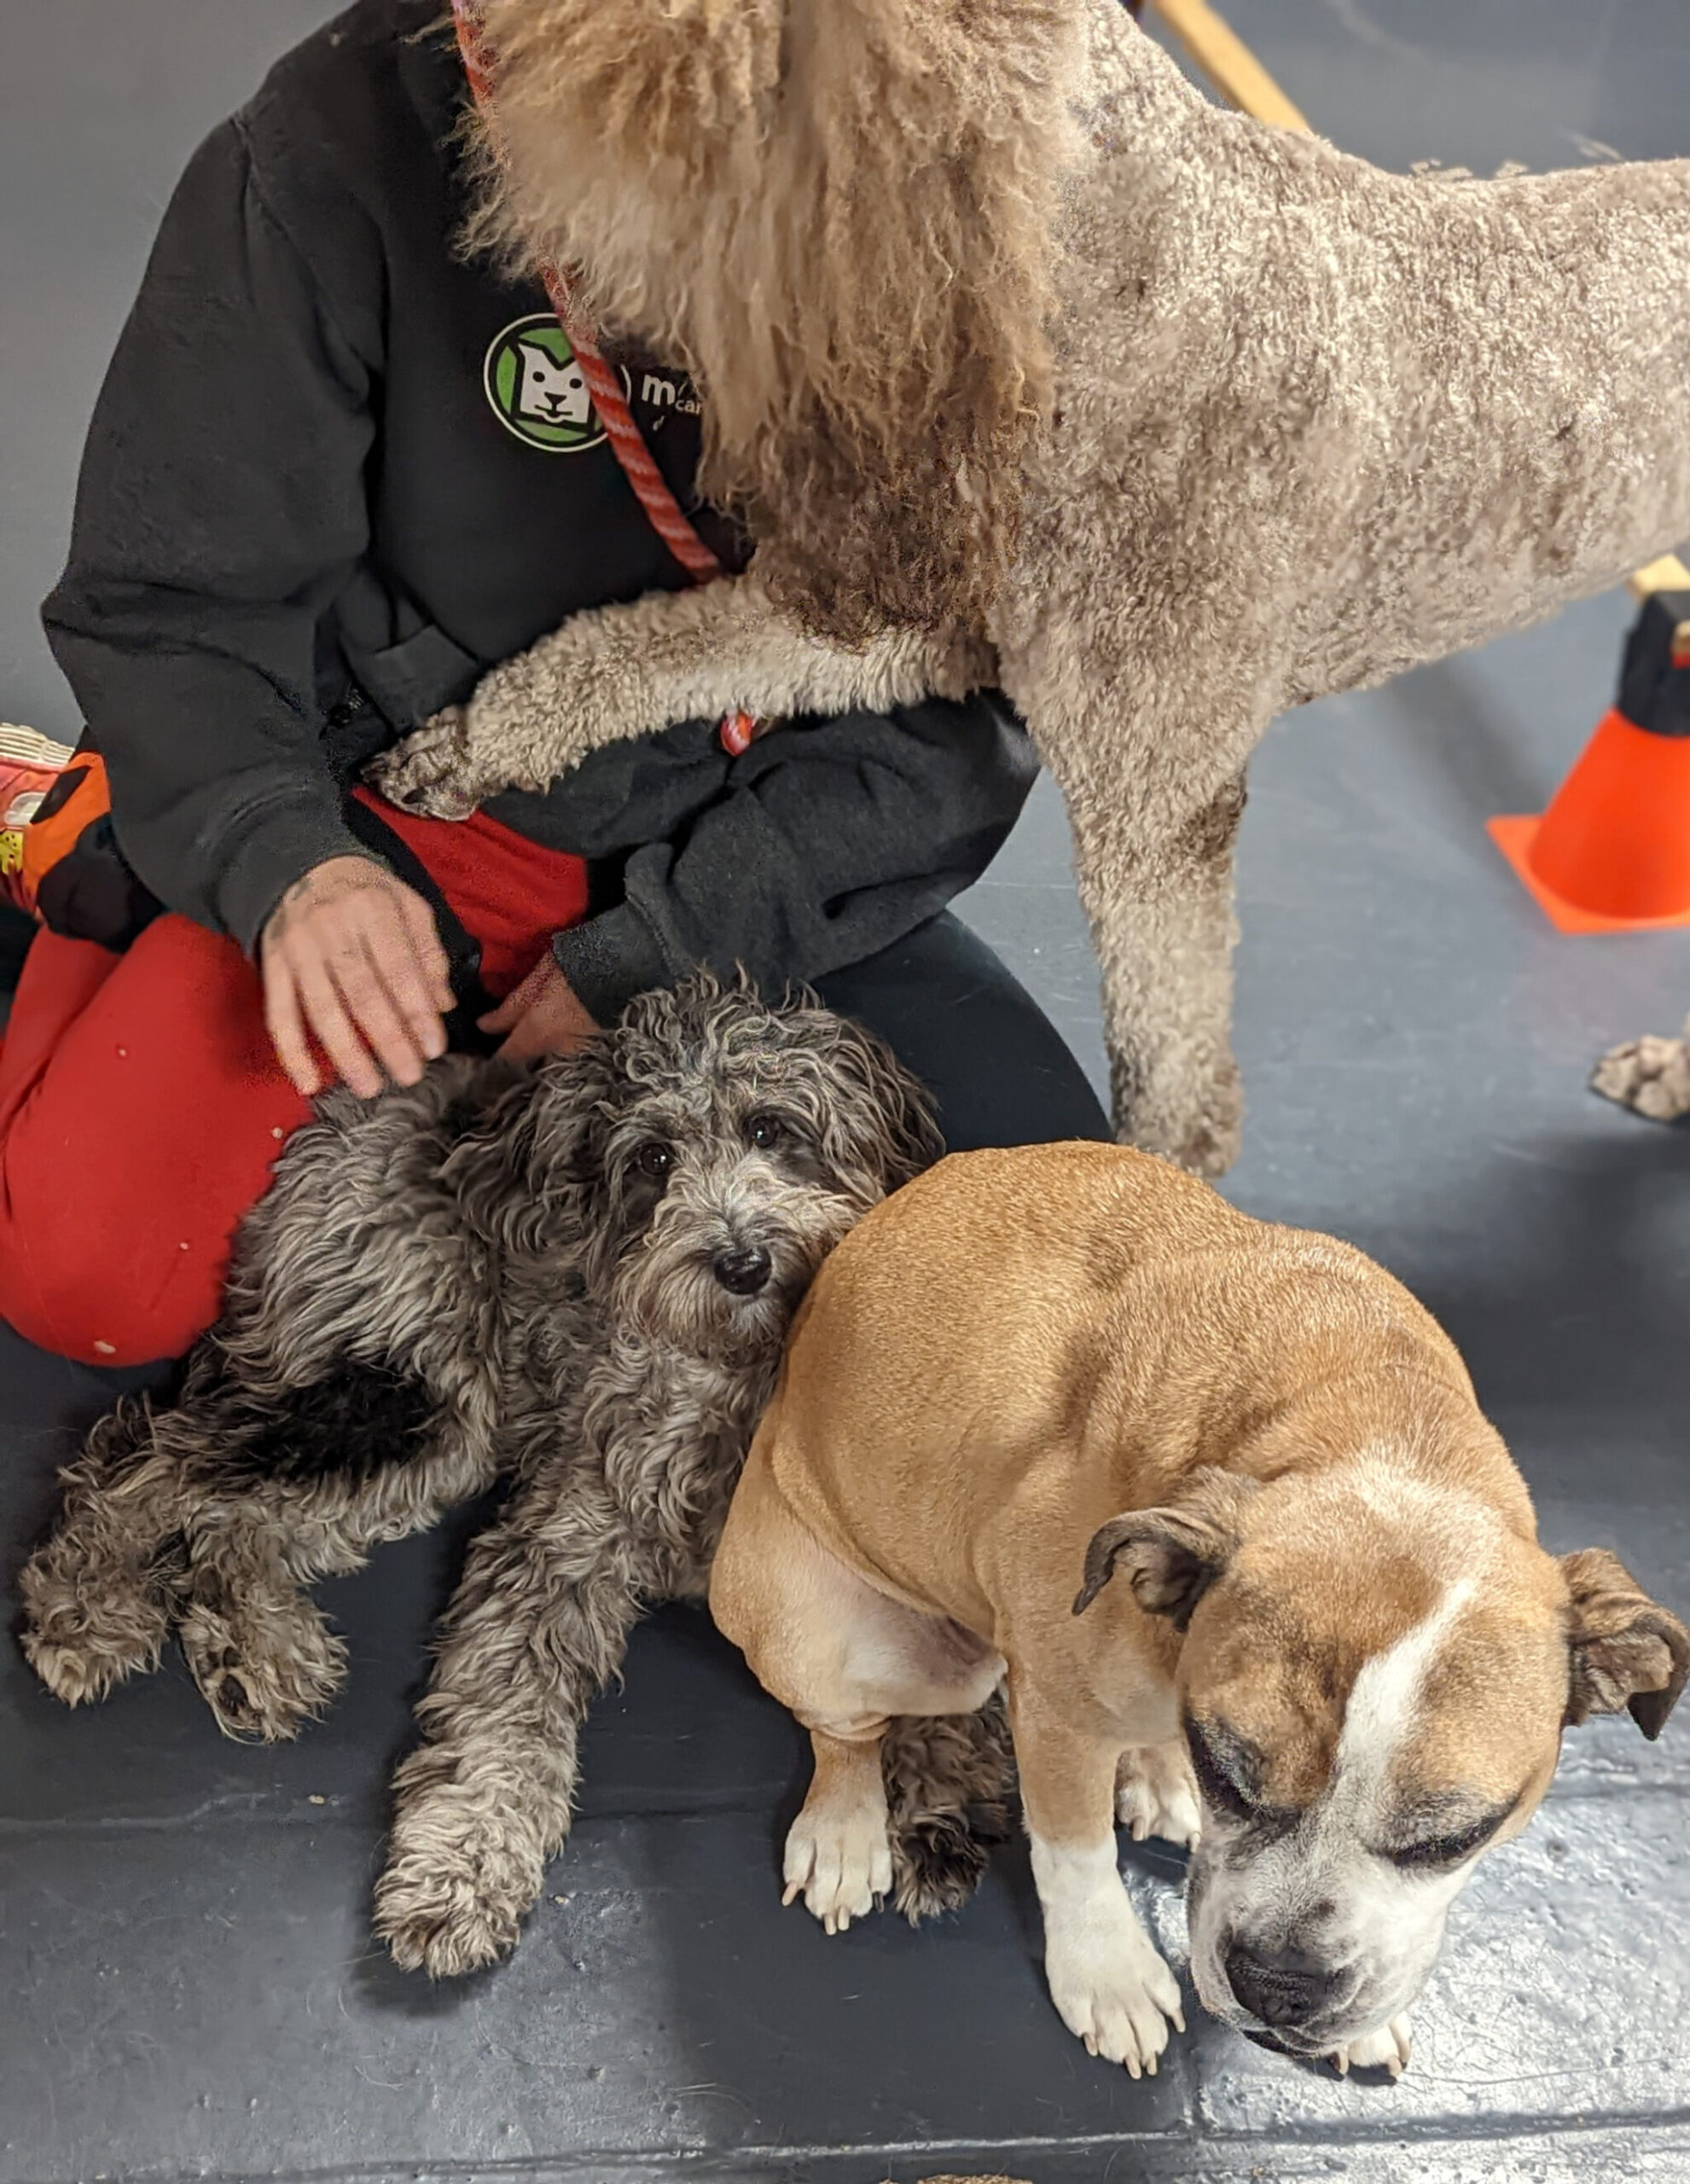 Confidence Club assistant, Tabi sits with Gemma (Aussiedoodle), Molly (Boxer Mix), and Yona (Poodle) cuddling up during nap time.